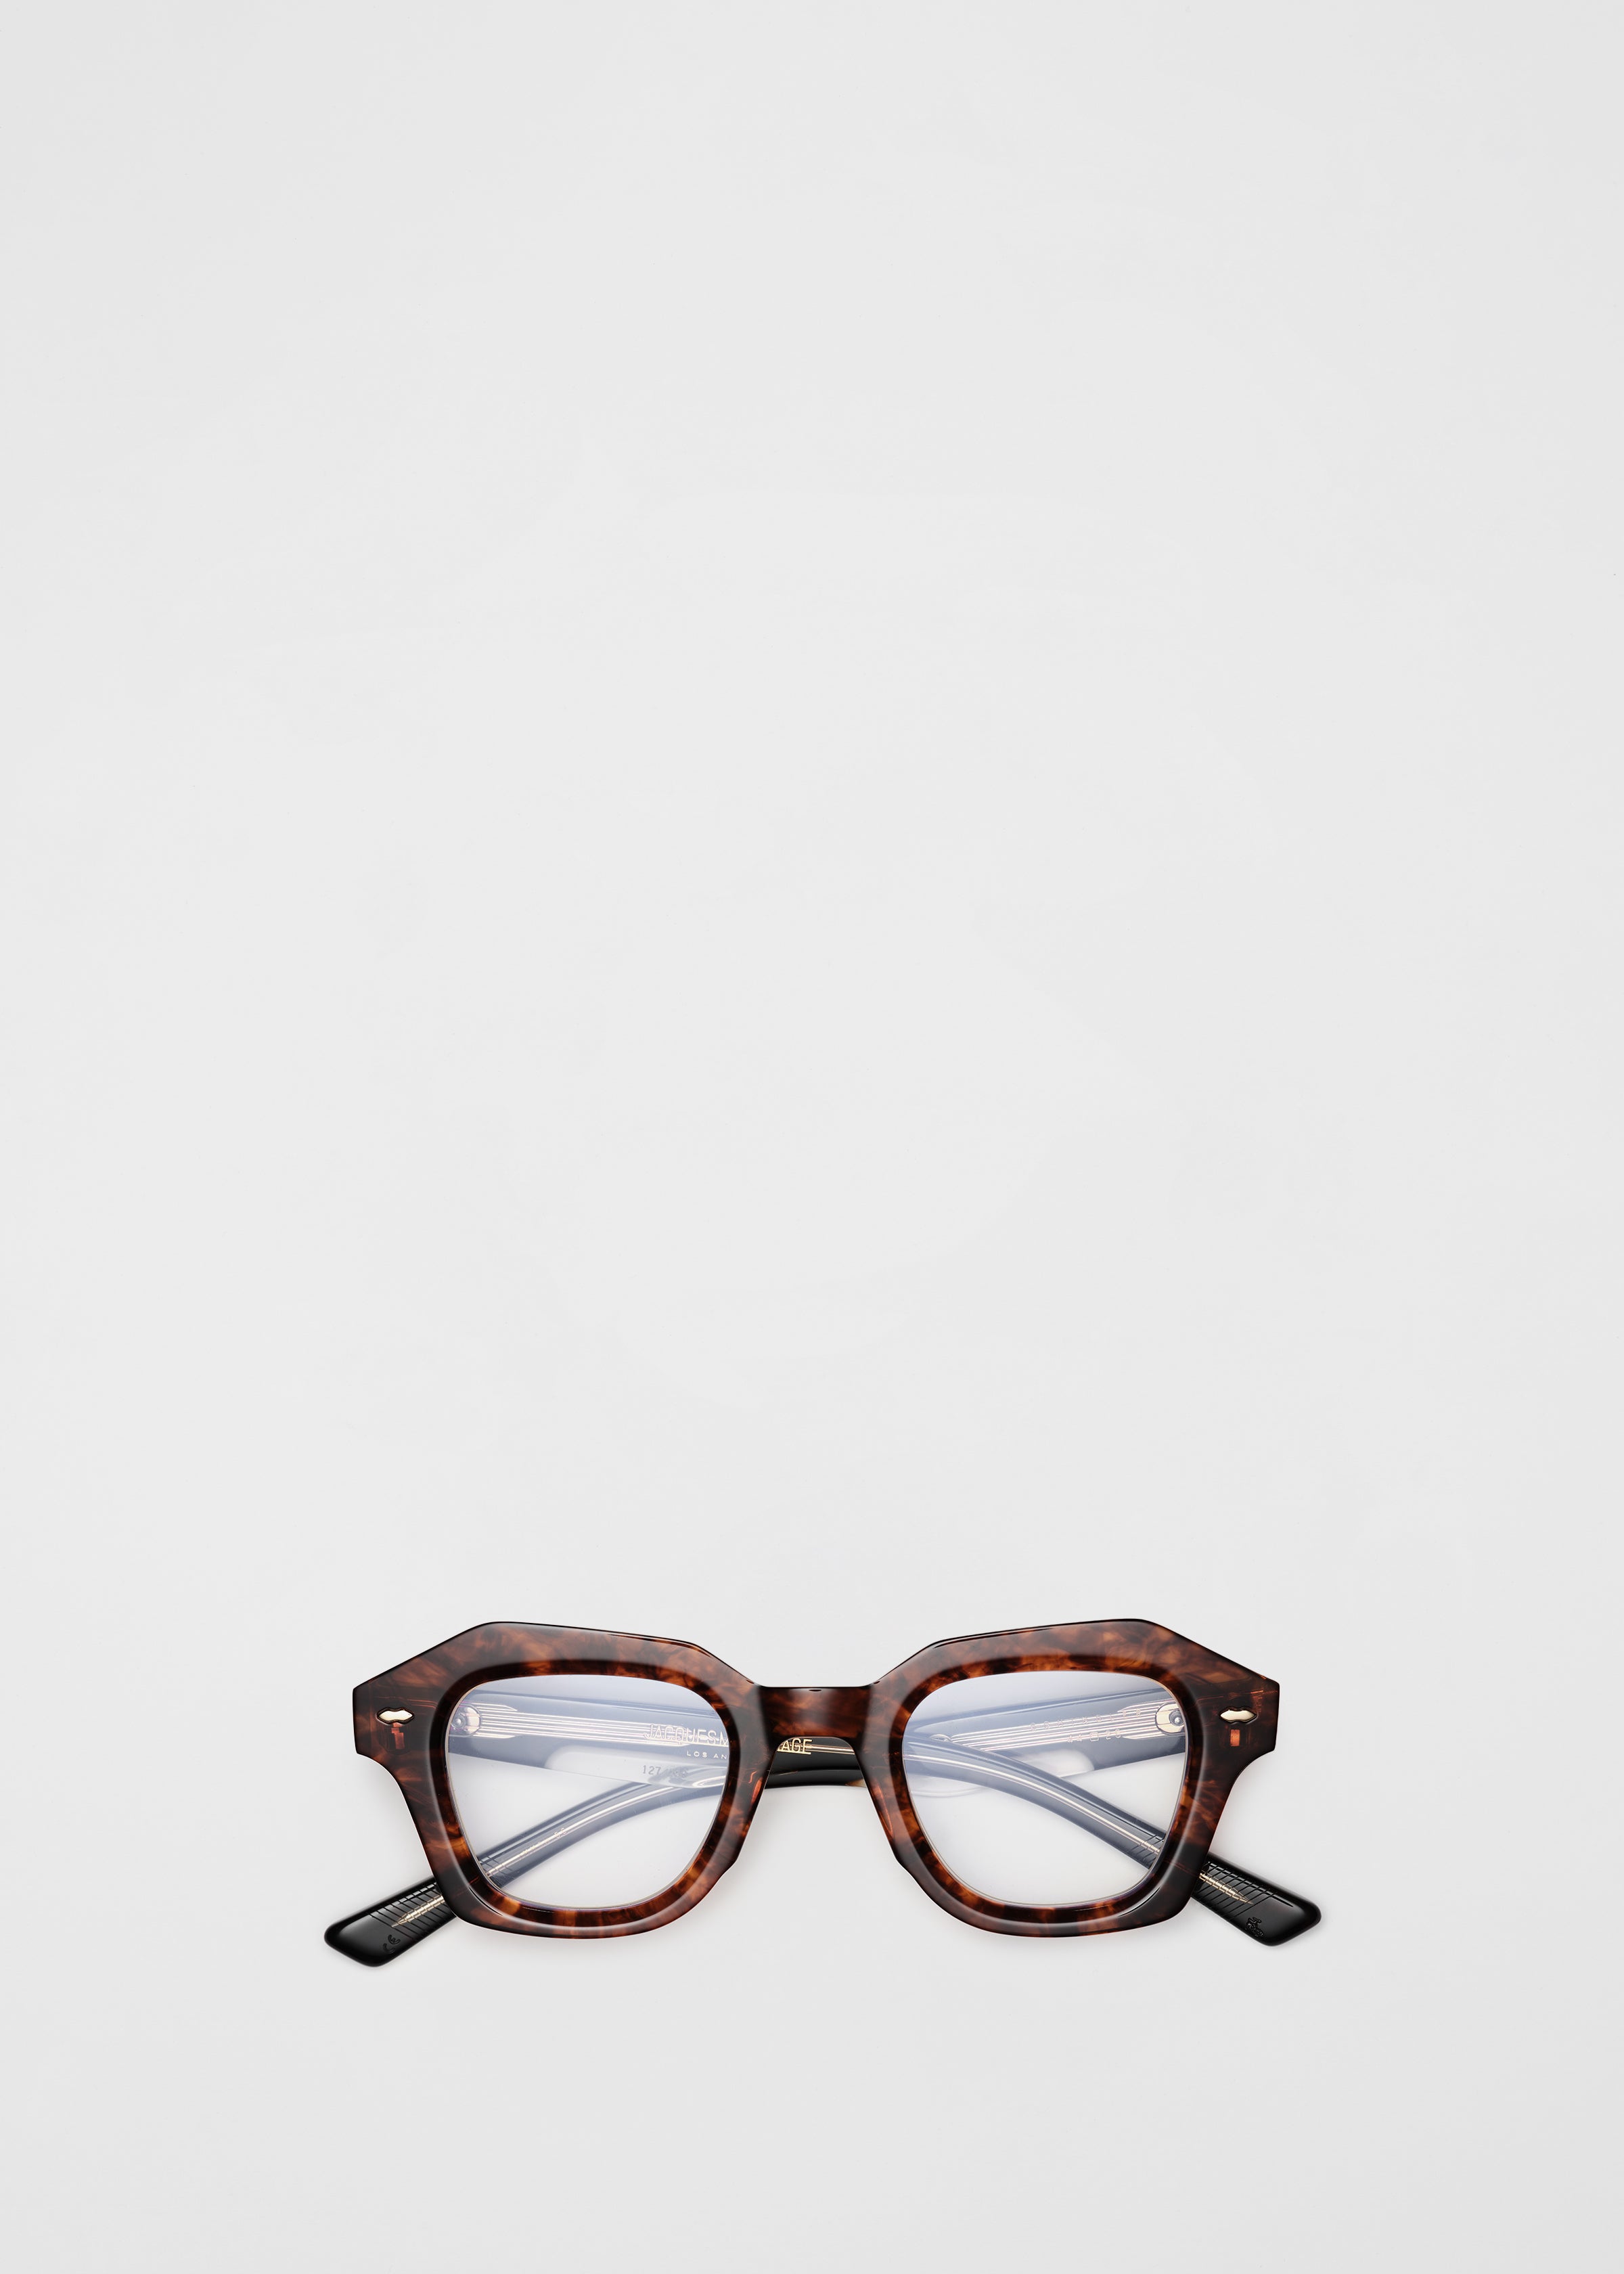 Schindler Glasses in Argyle - CO Collections